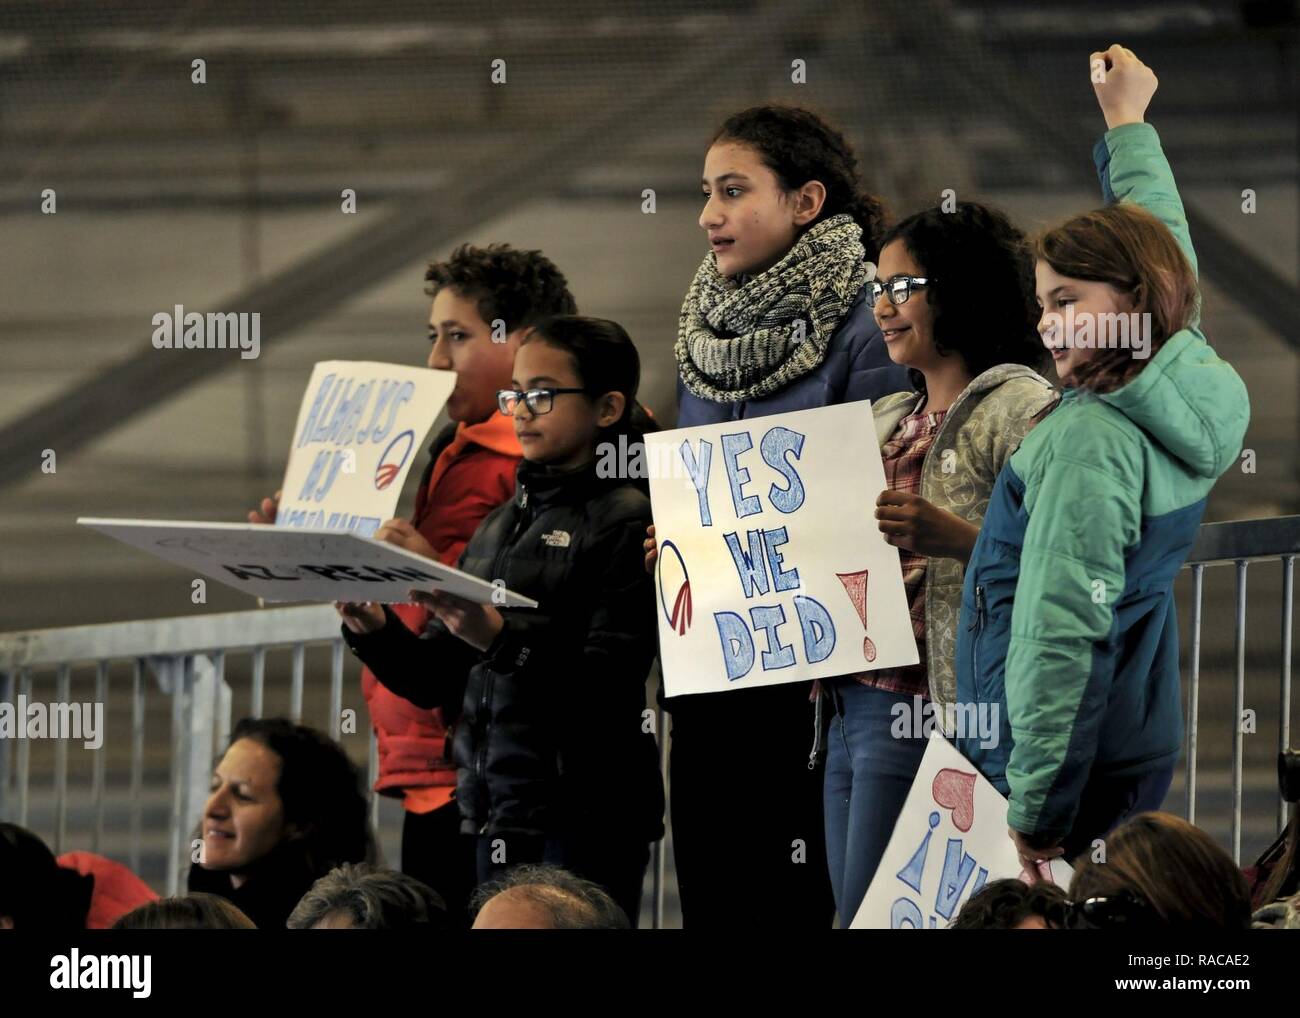 Children hold signs in support of former President Barack Obama during his farewell speech at Joint Base Andrews, Md. Jan. 20, 2017. After his speech Obama and his wife Michelle took time to shake hands and exchange hugs with members of the crowd before boarding a plane to depart. Stock Photo